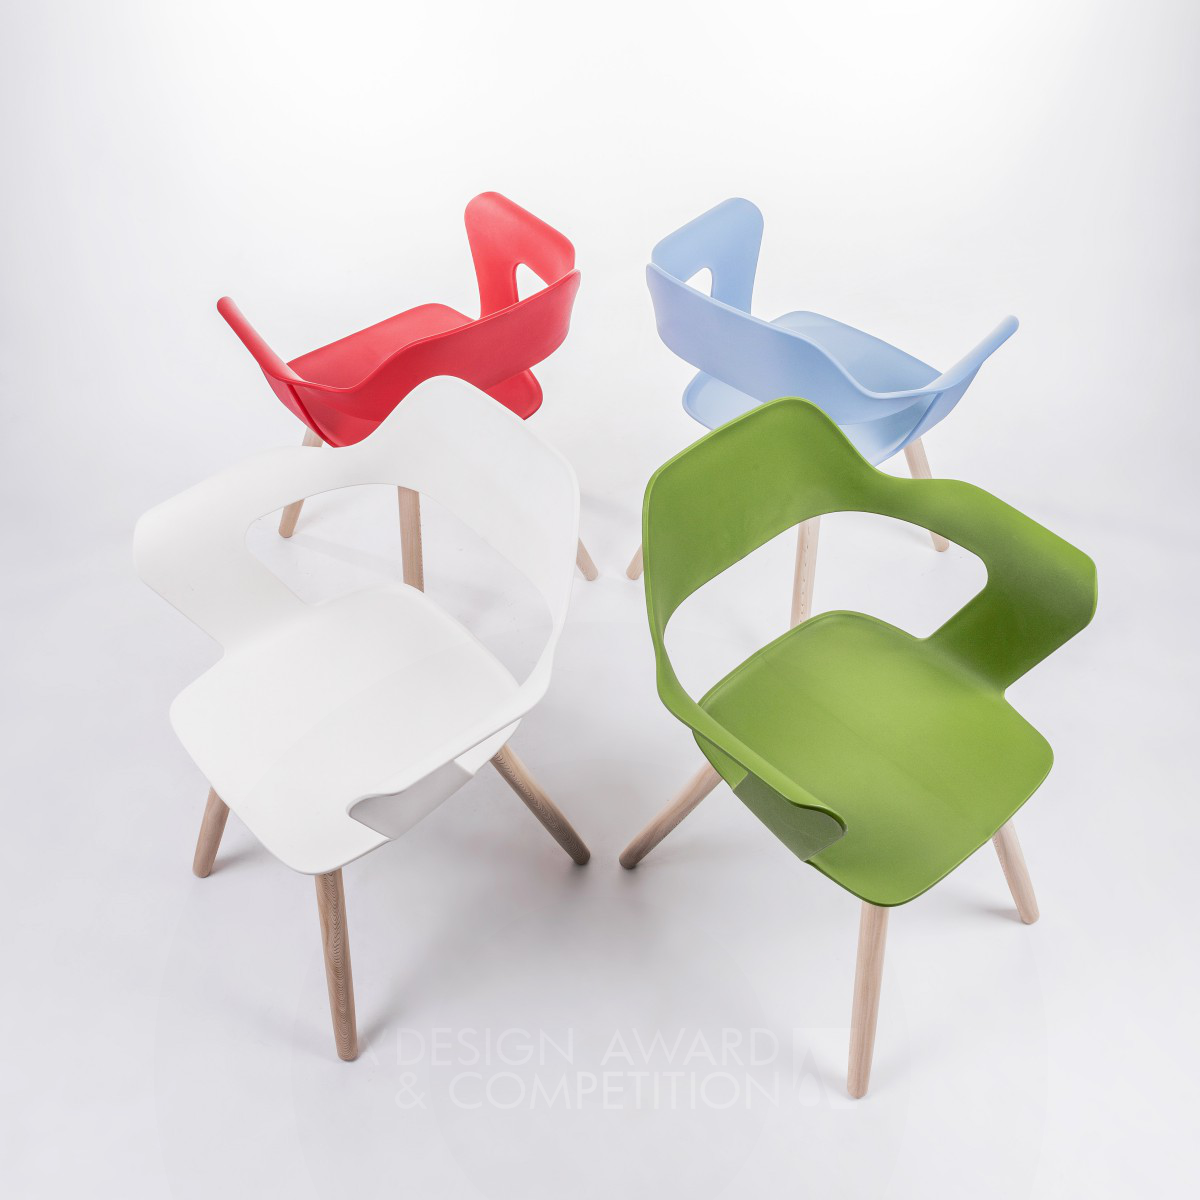 Muse Knockdown Chair by HanYi Huang